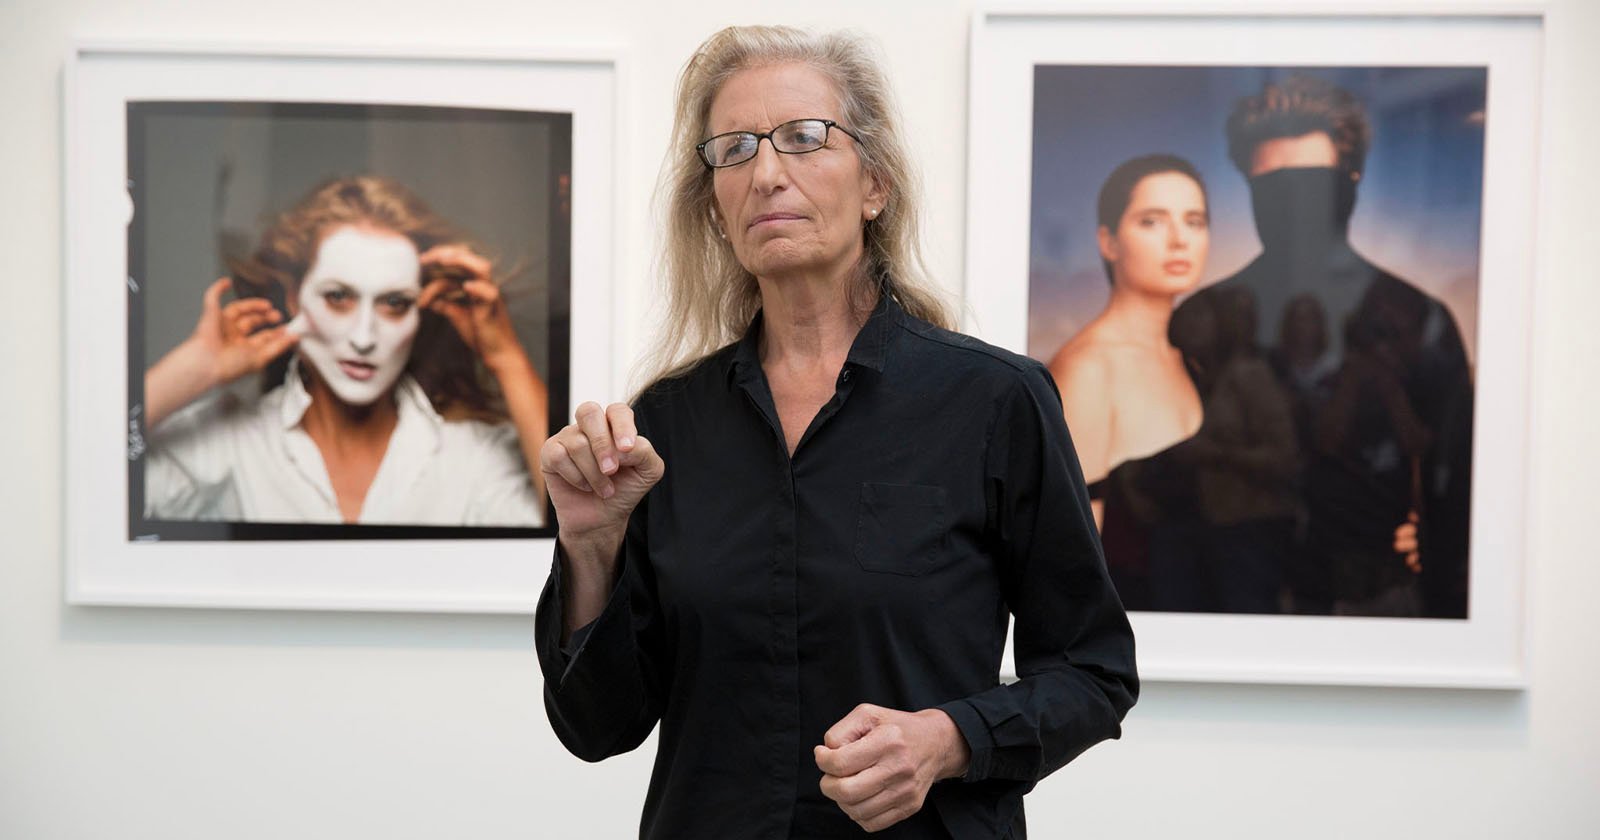  annie leibovitz says she not worried about 